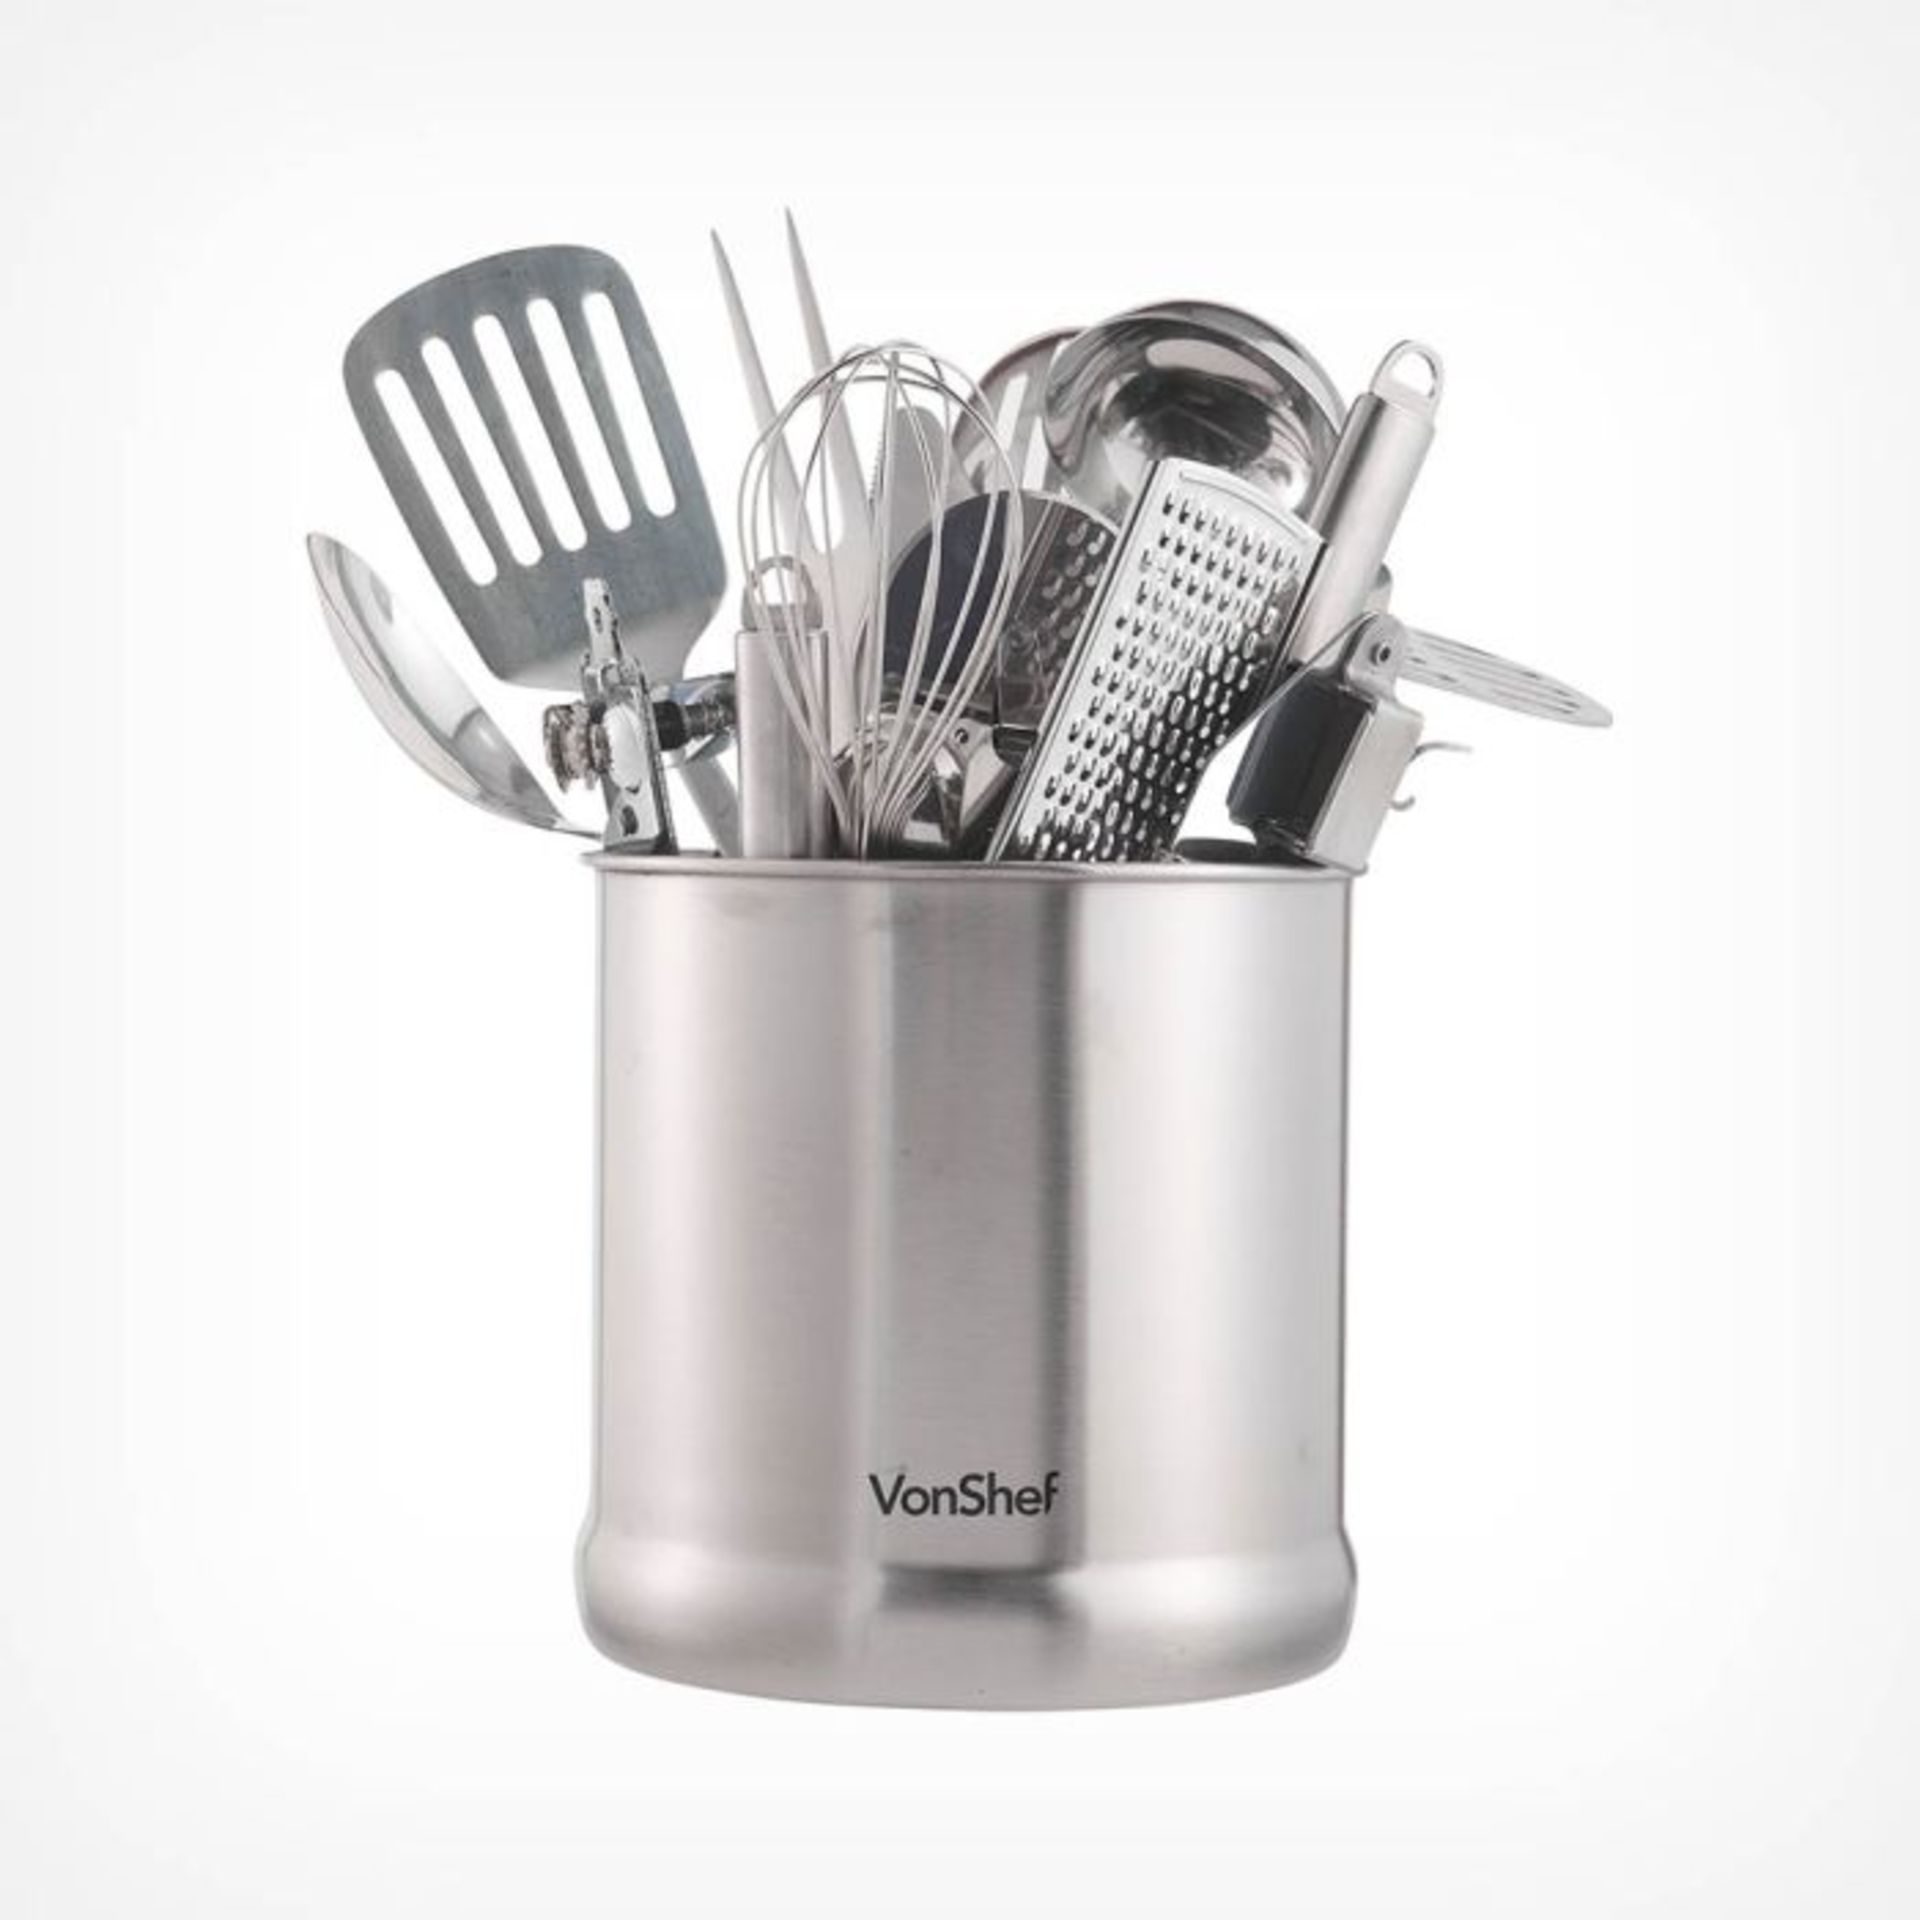 Utensil Holder. - ER51. Take this cutlery caddy. Its 7" diameter means it’s large enough to store